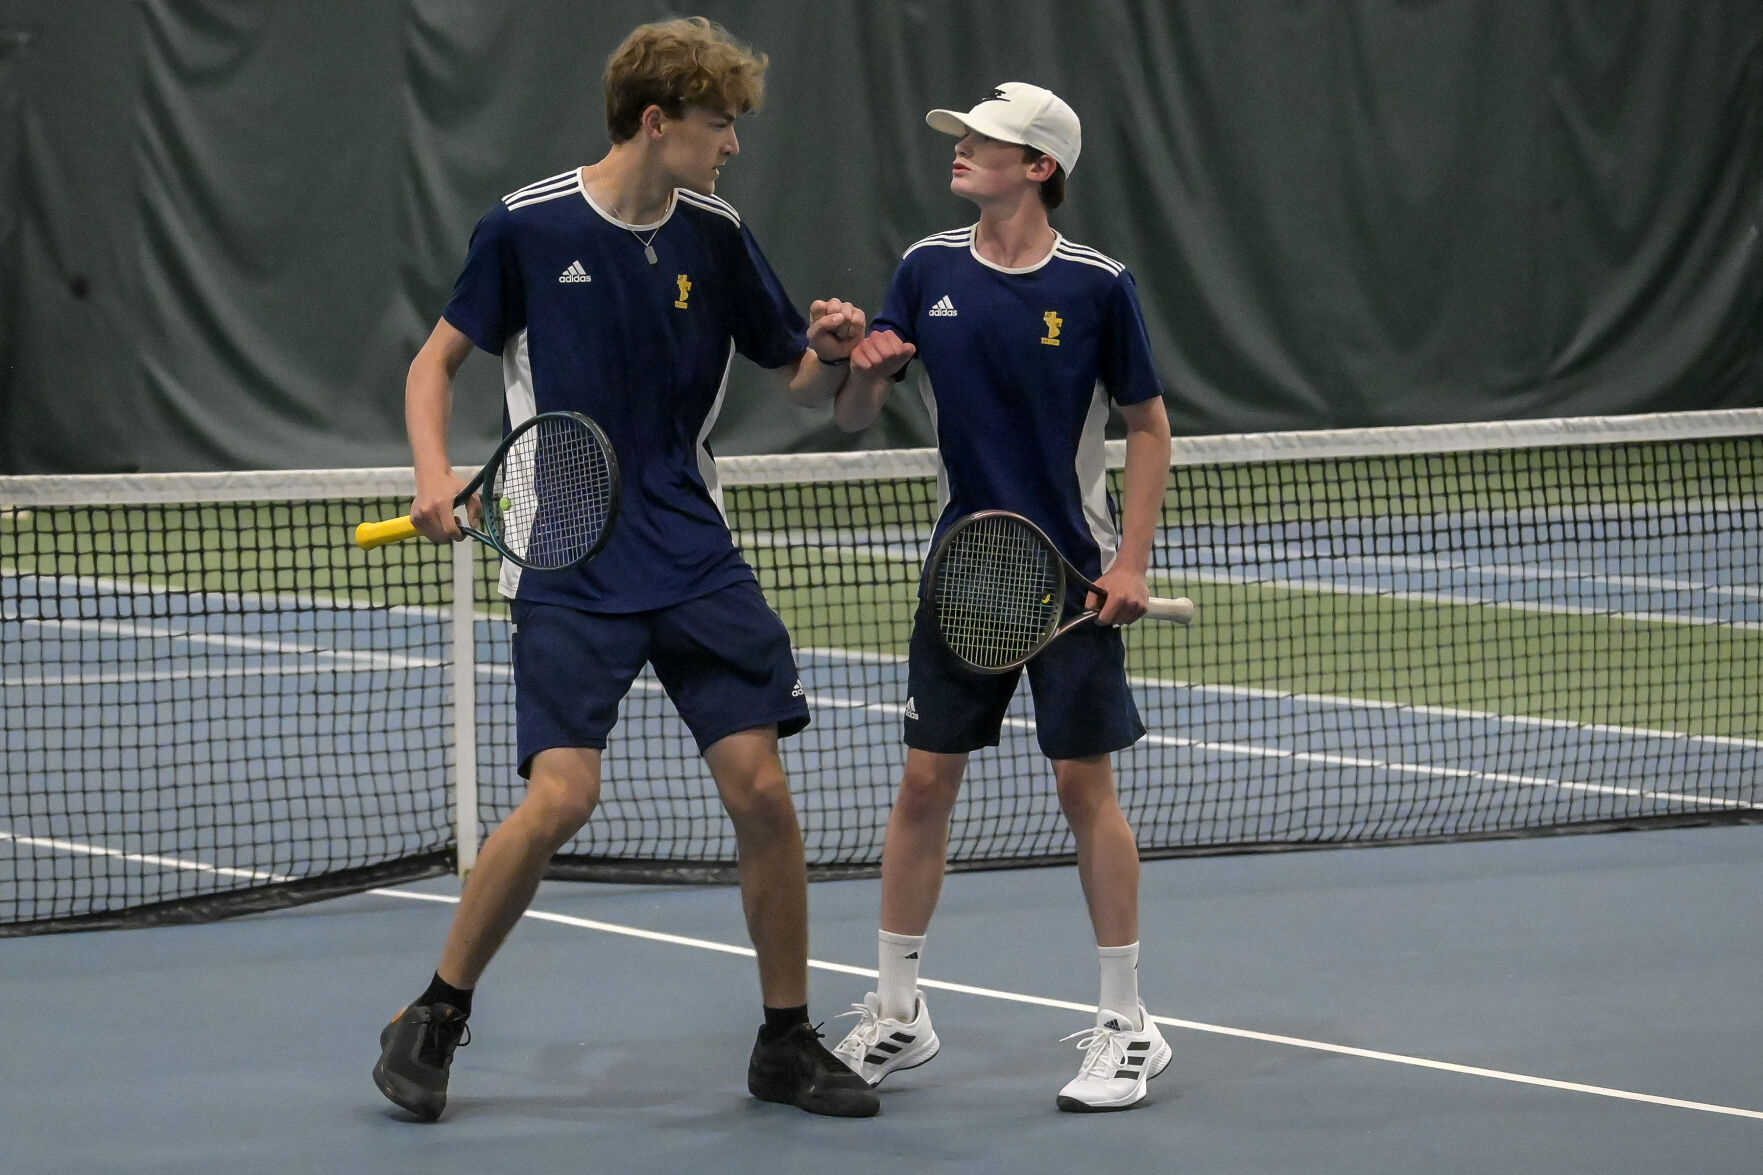 Rapid City Christian Tennis Shines: Comets Win 4 State Titles and State Runner-Up